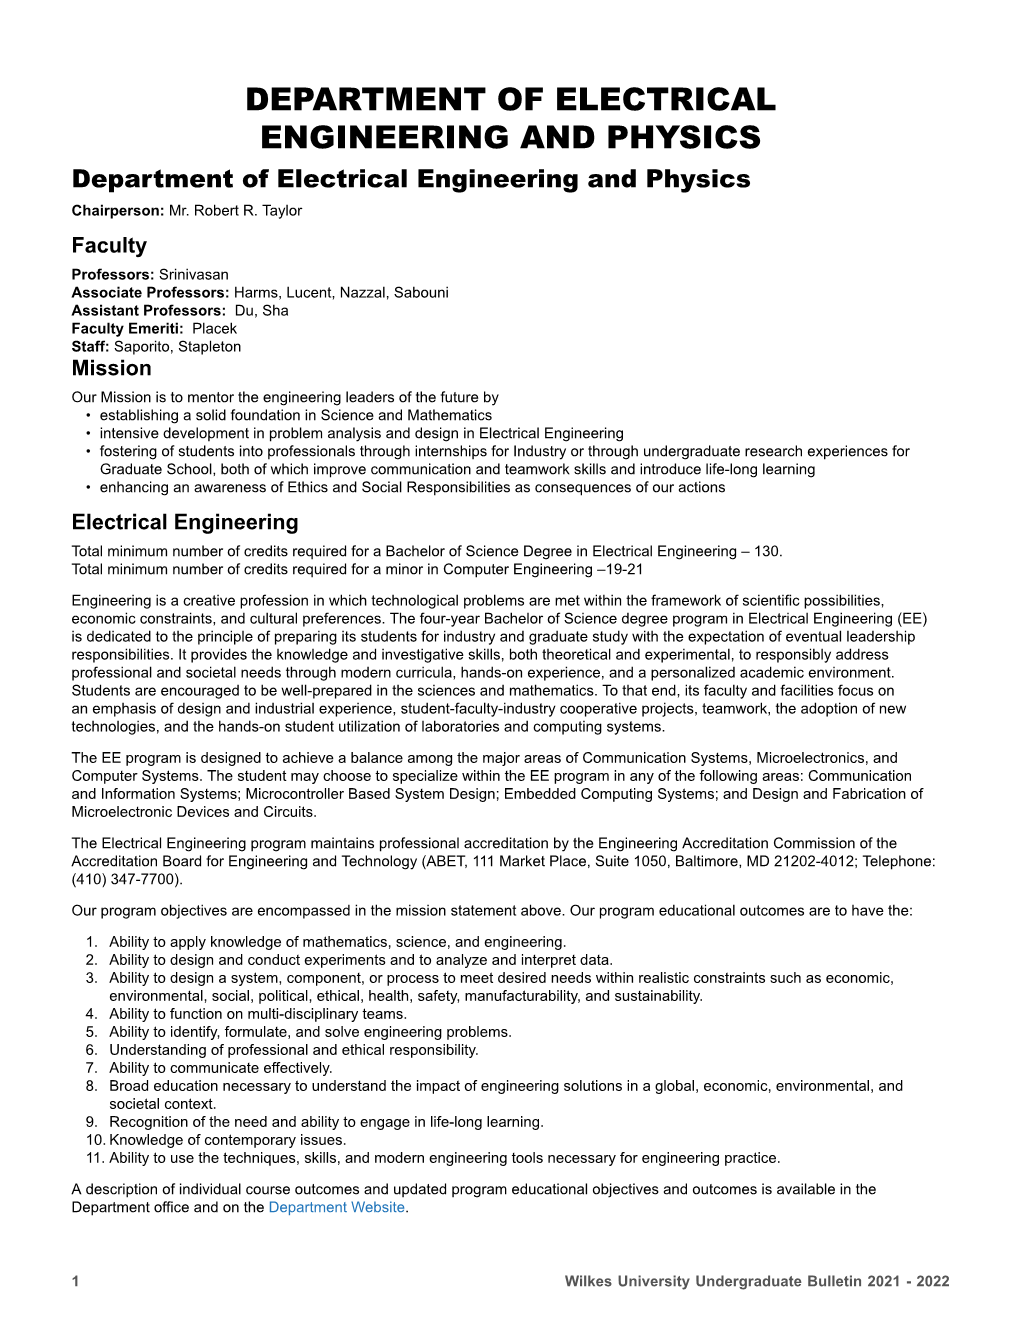 DEPARTMENT of ELECTRICAL ENGINEERING and PHYSICS Department of Electrical Engineering and Physics Chairperson: Mr